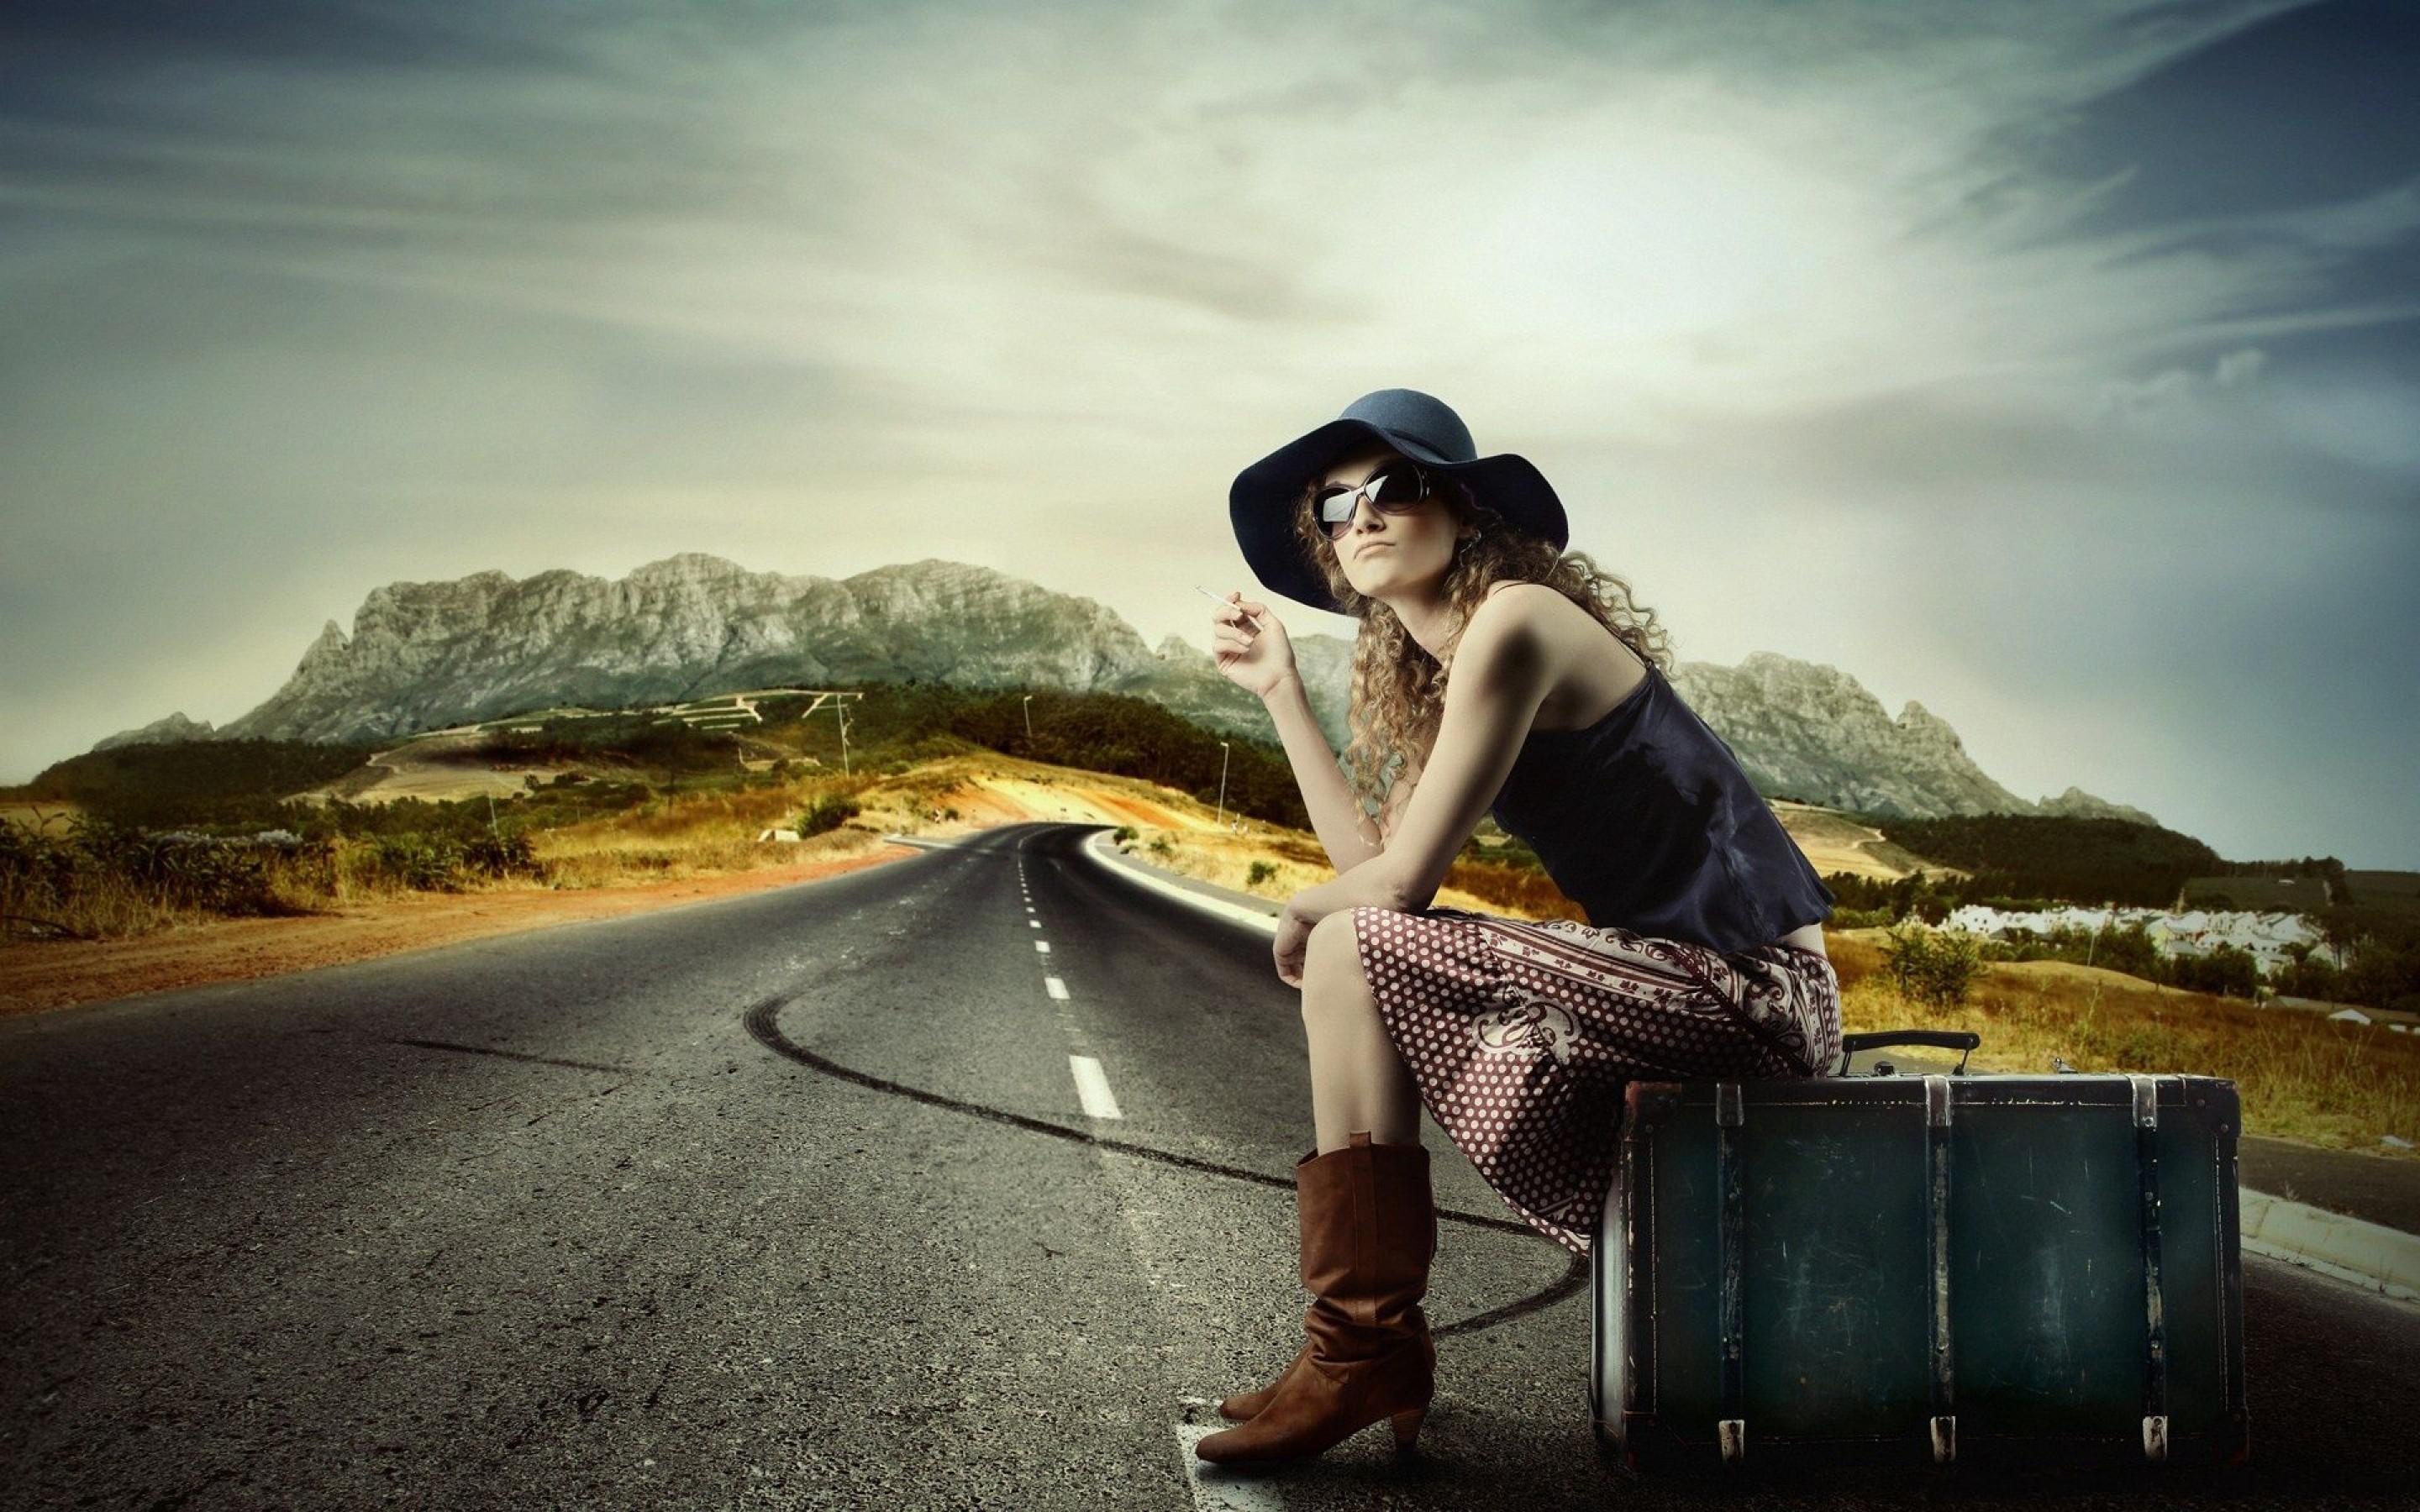 Girl on the road hitchhiking